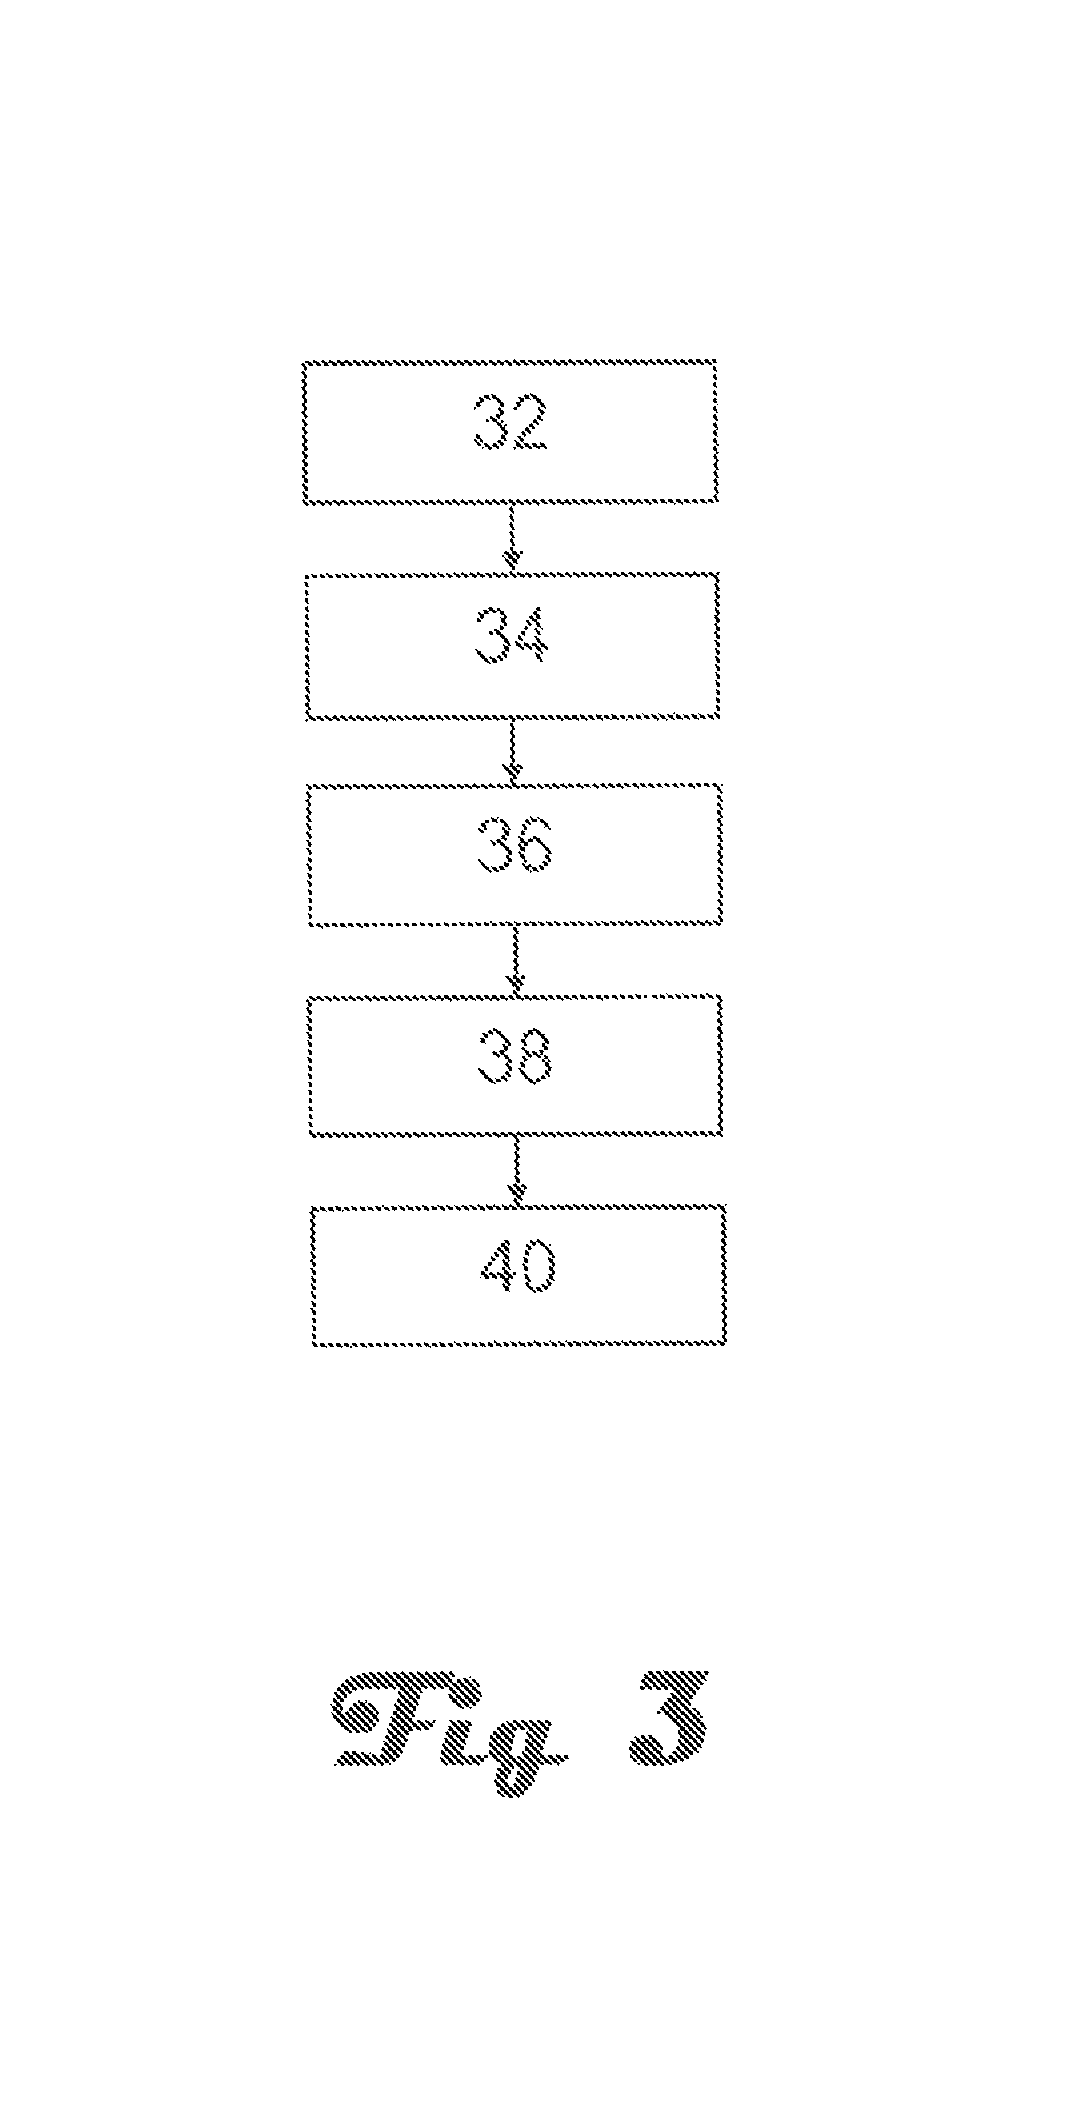 Capacitor with charge time reducing additives and work function modifiers